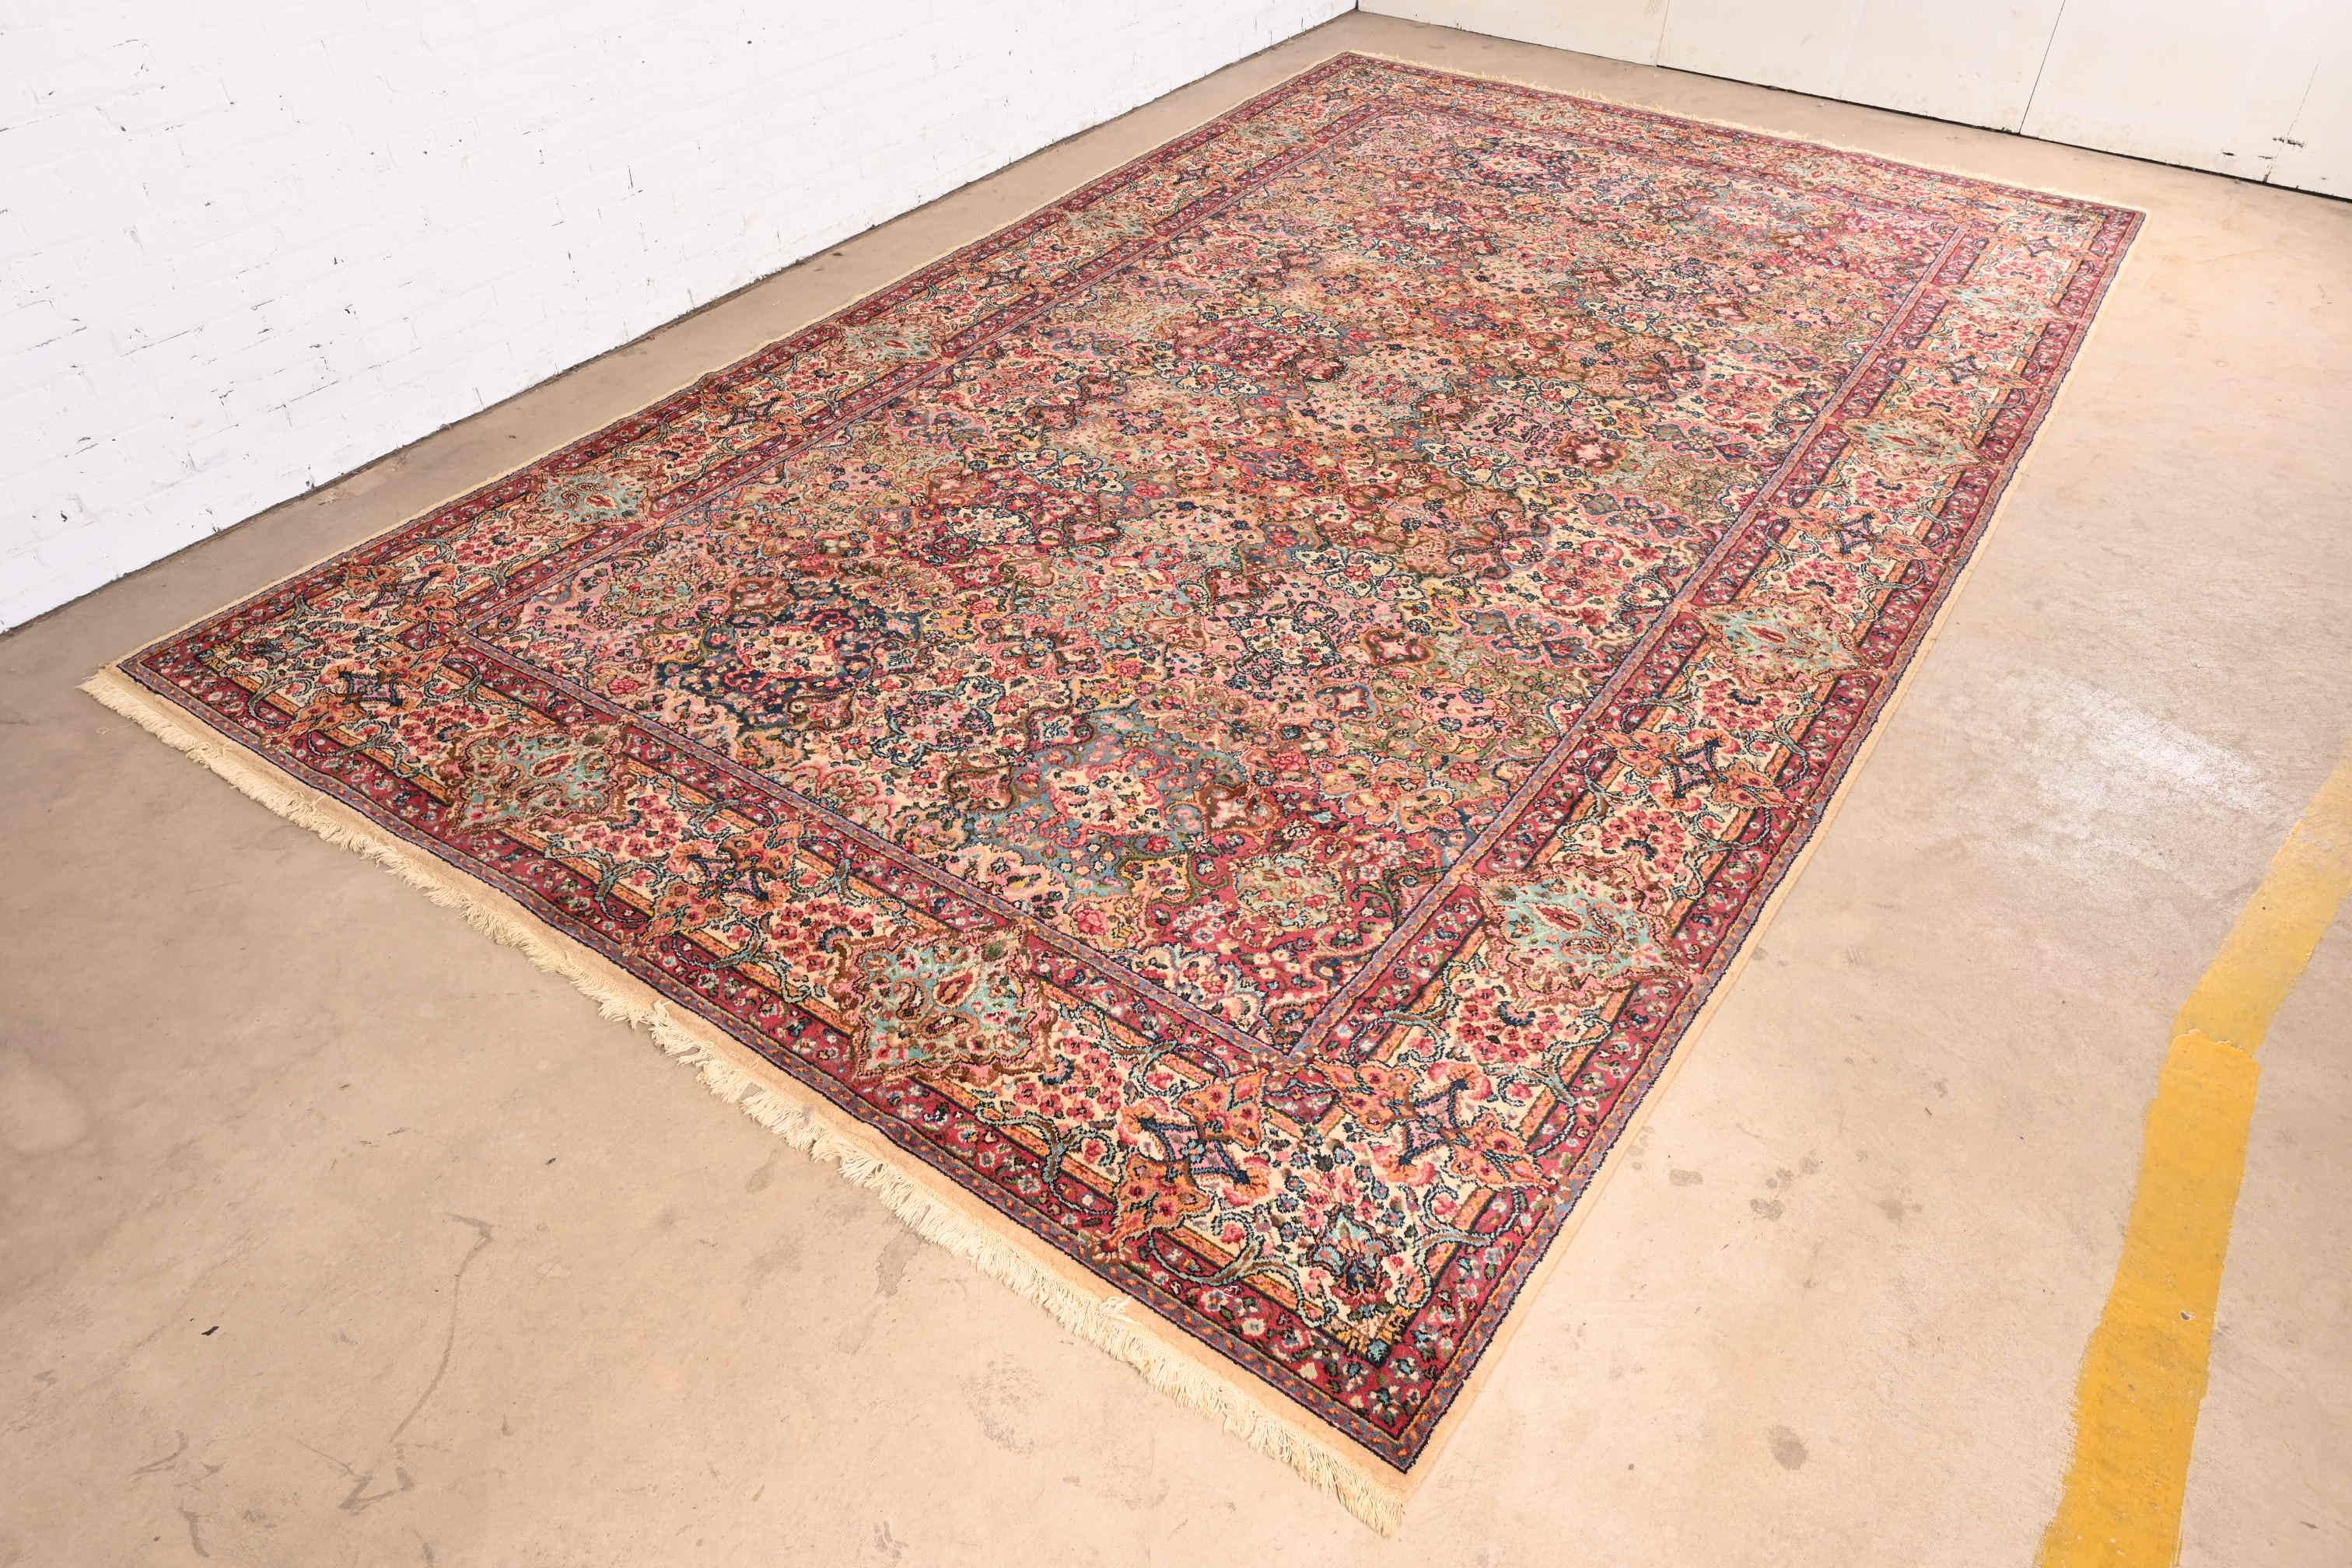 Karastan Kirman Room Size Wool Rug, Circa 1940s In Good Condition For Sale In South Bend, IN